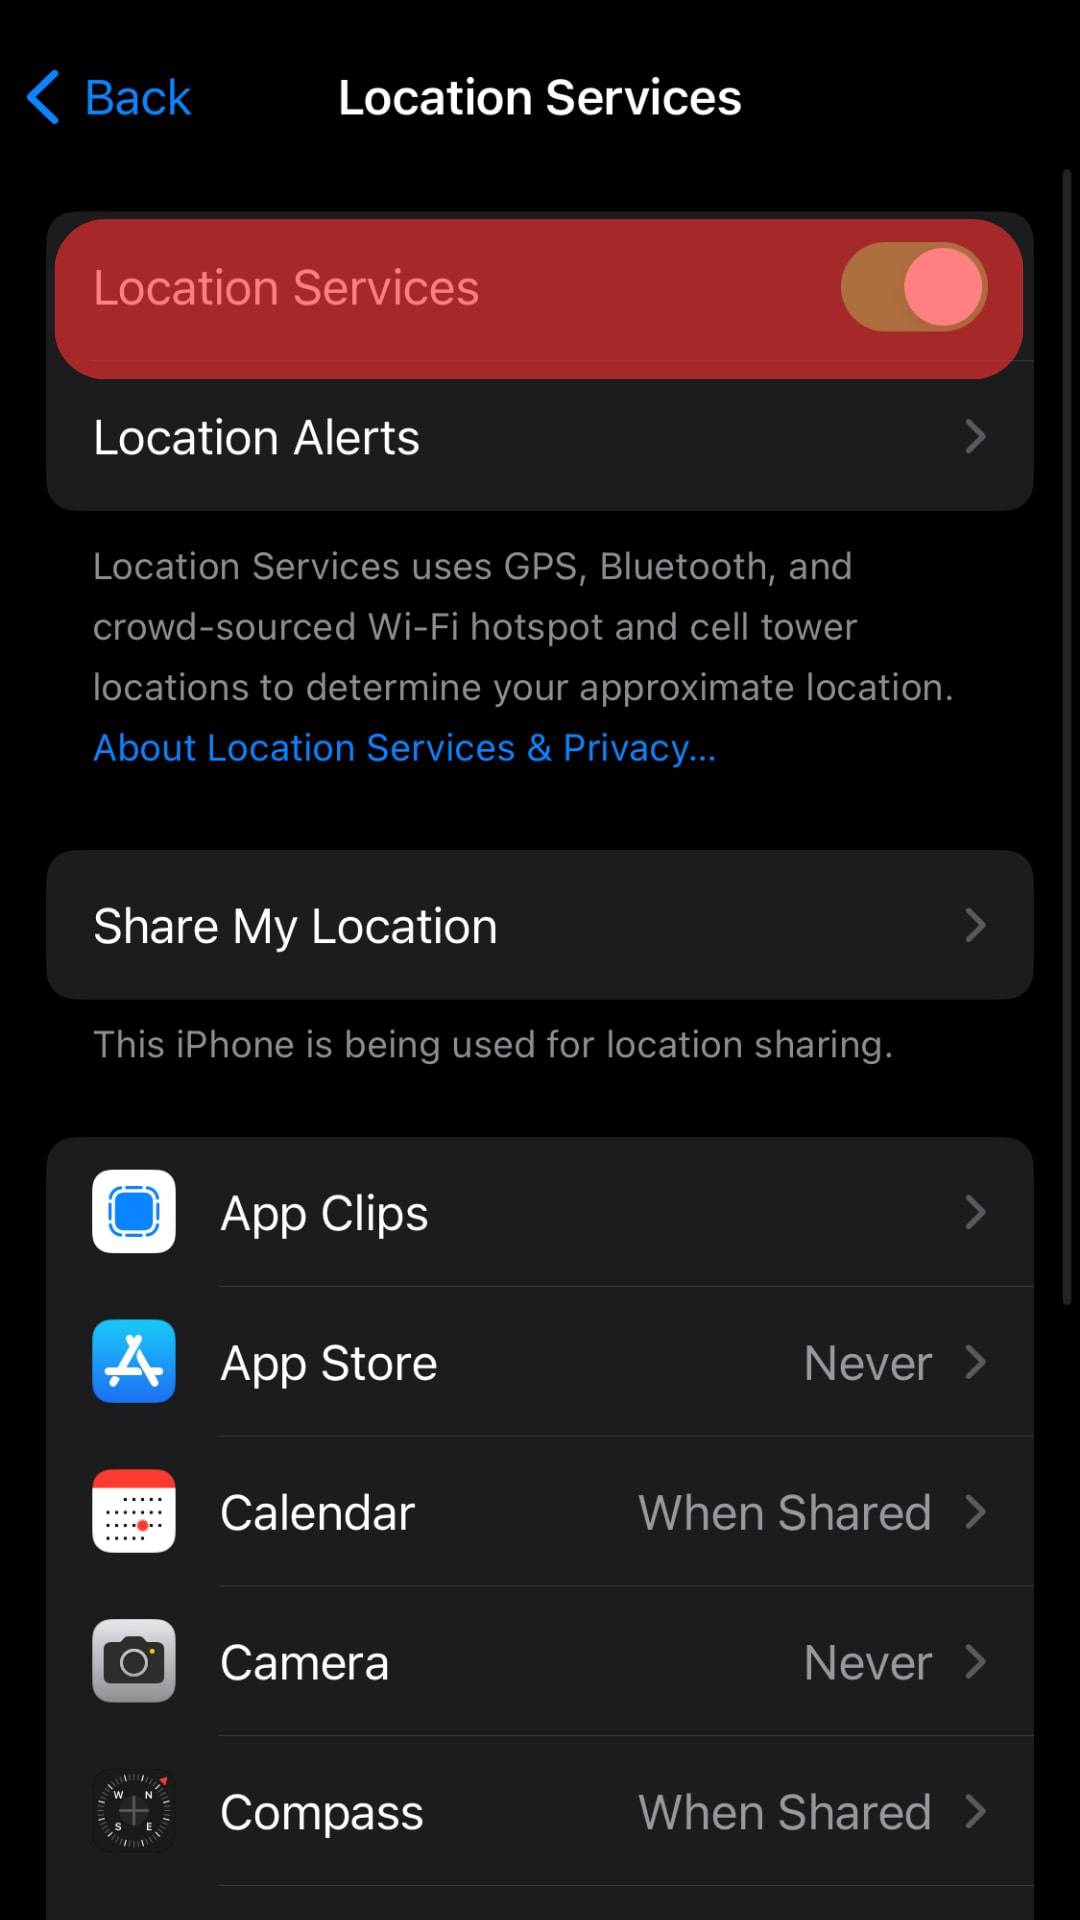 Make Sure The Location Services Toggle Is Switched On.